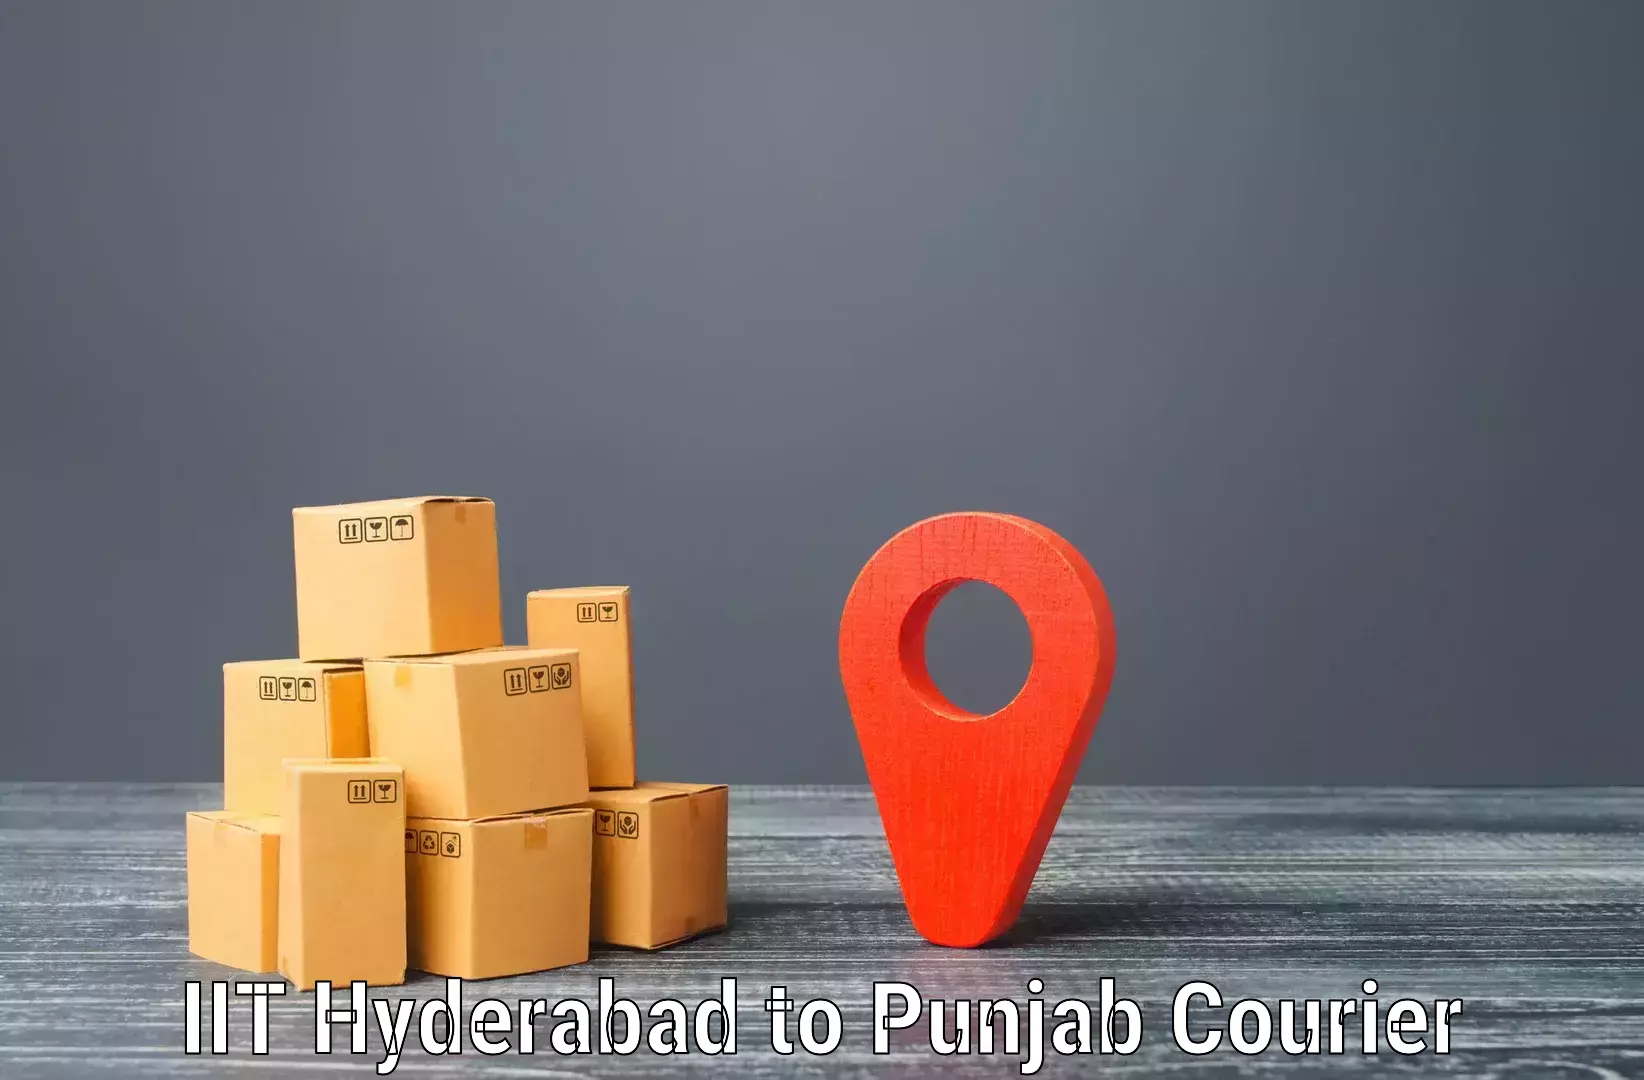 Nationwide parcel services IIT Hyderabad to Nawanshahr